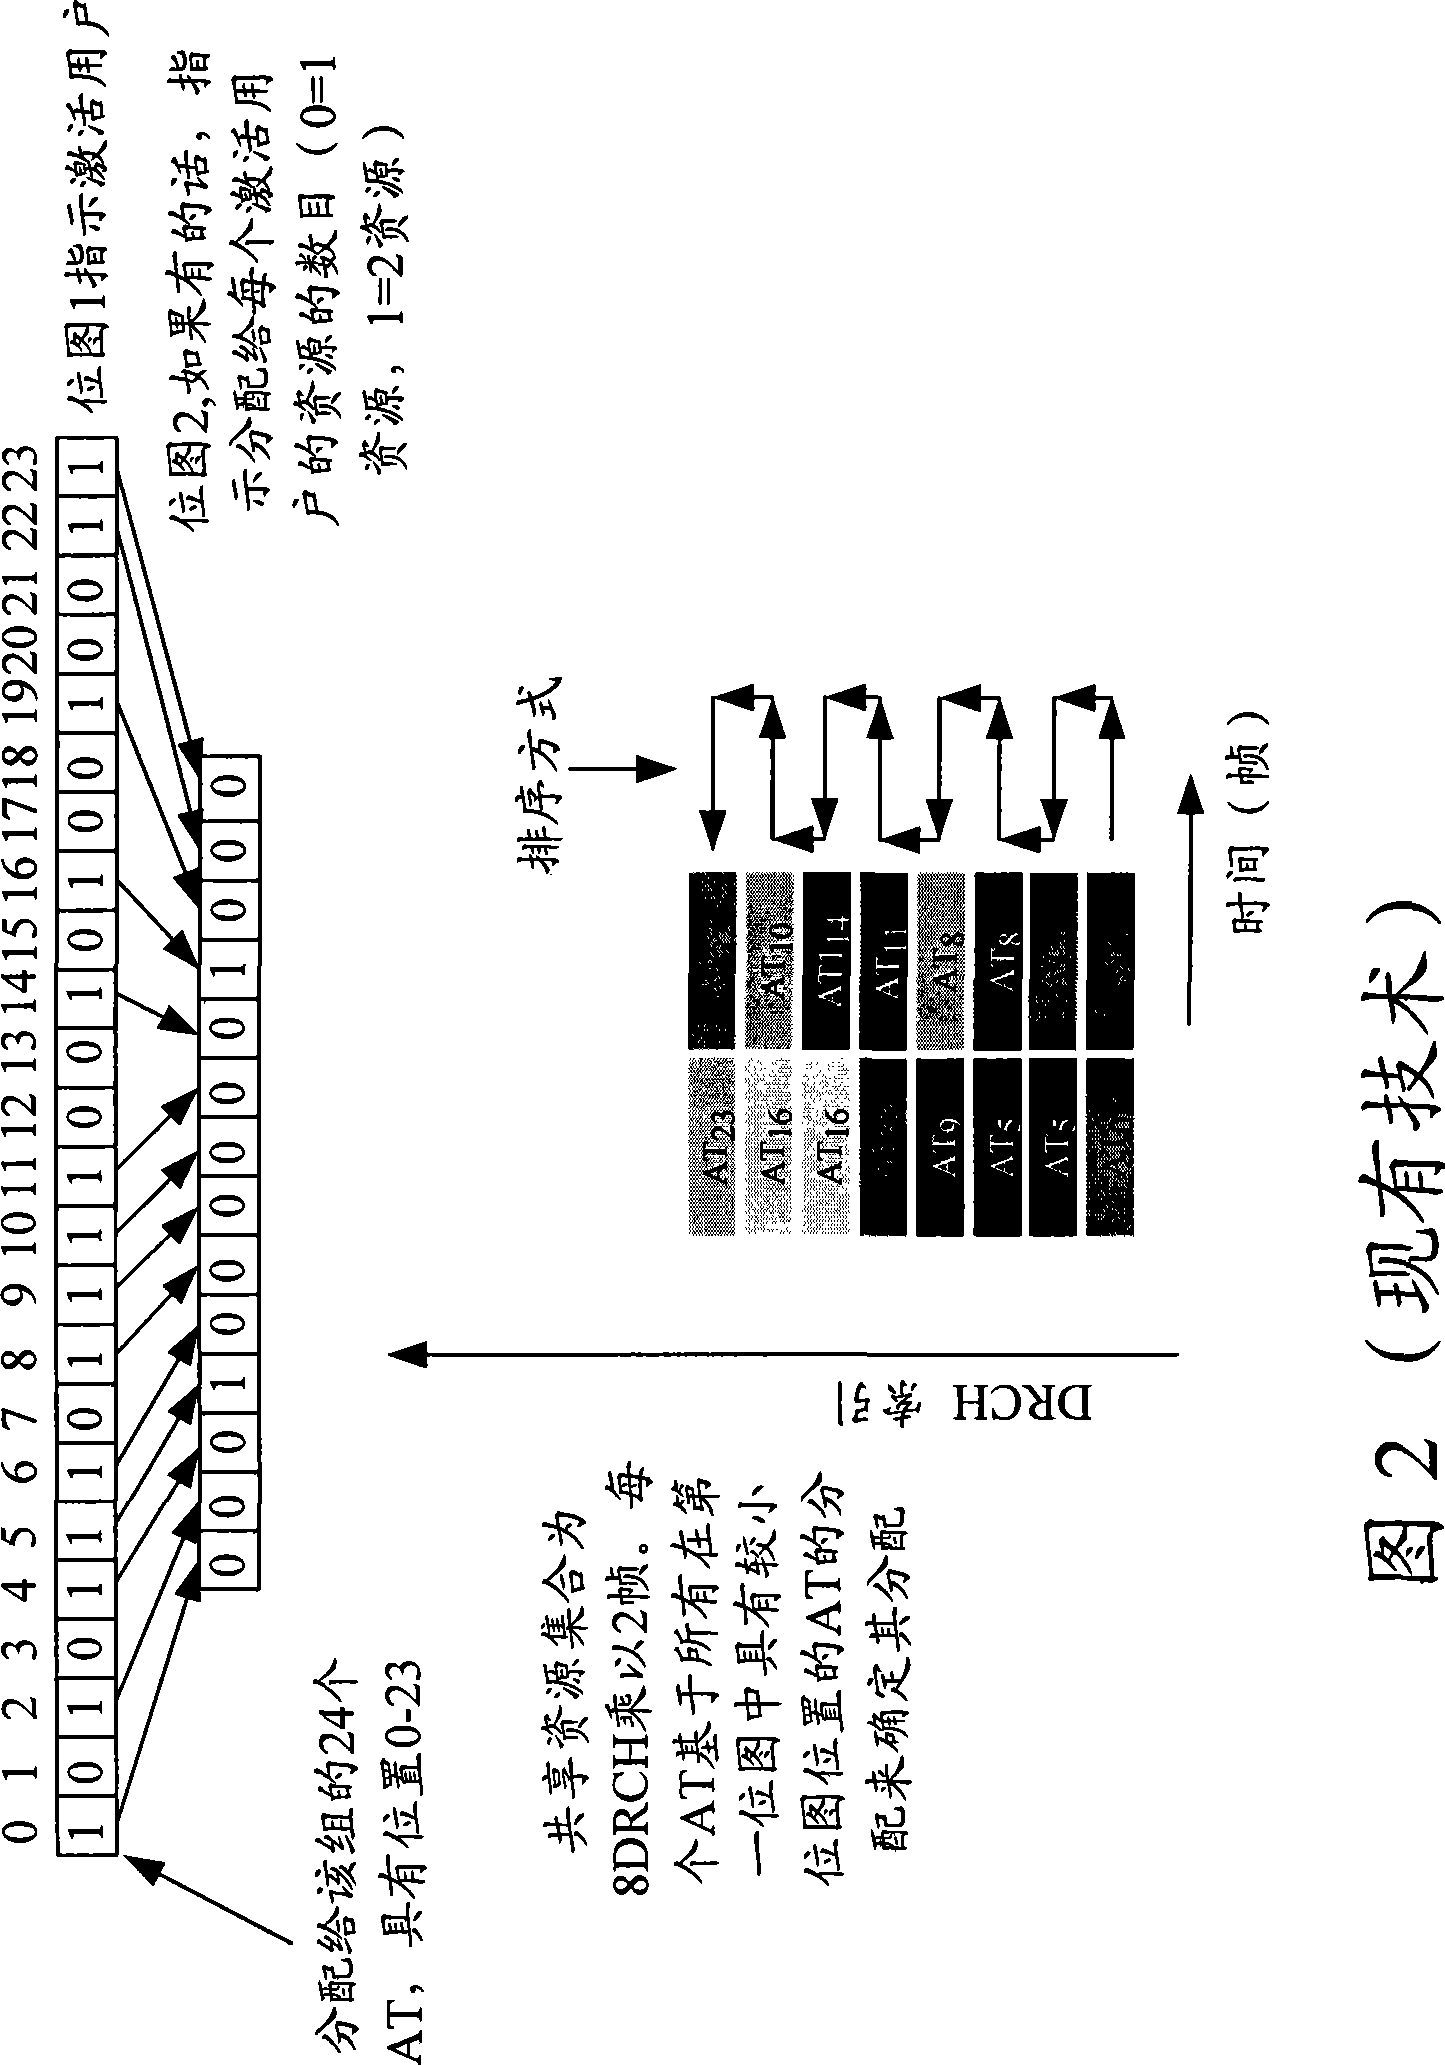 Method and apparatus for sharing radio resources in a wireless communications system